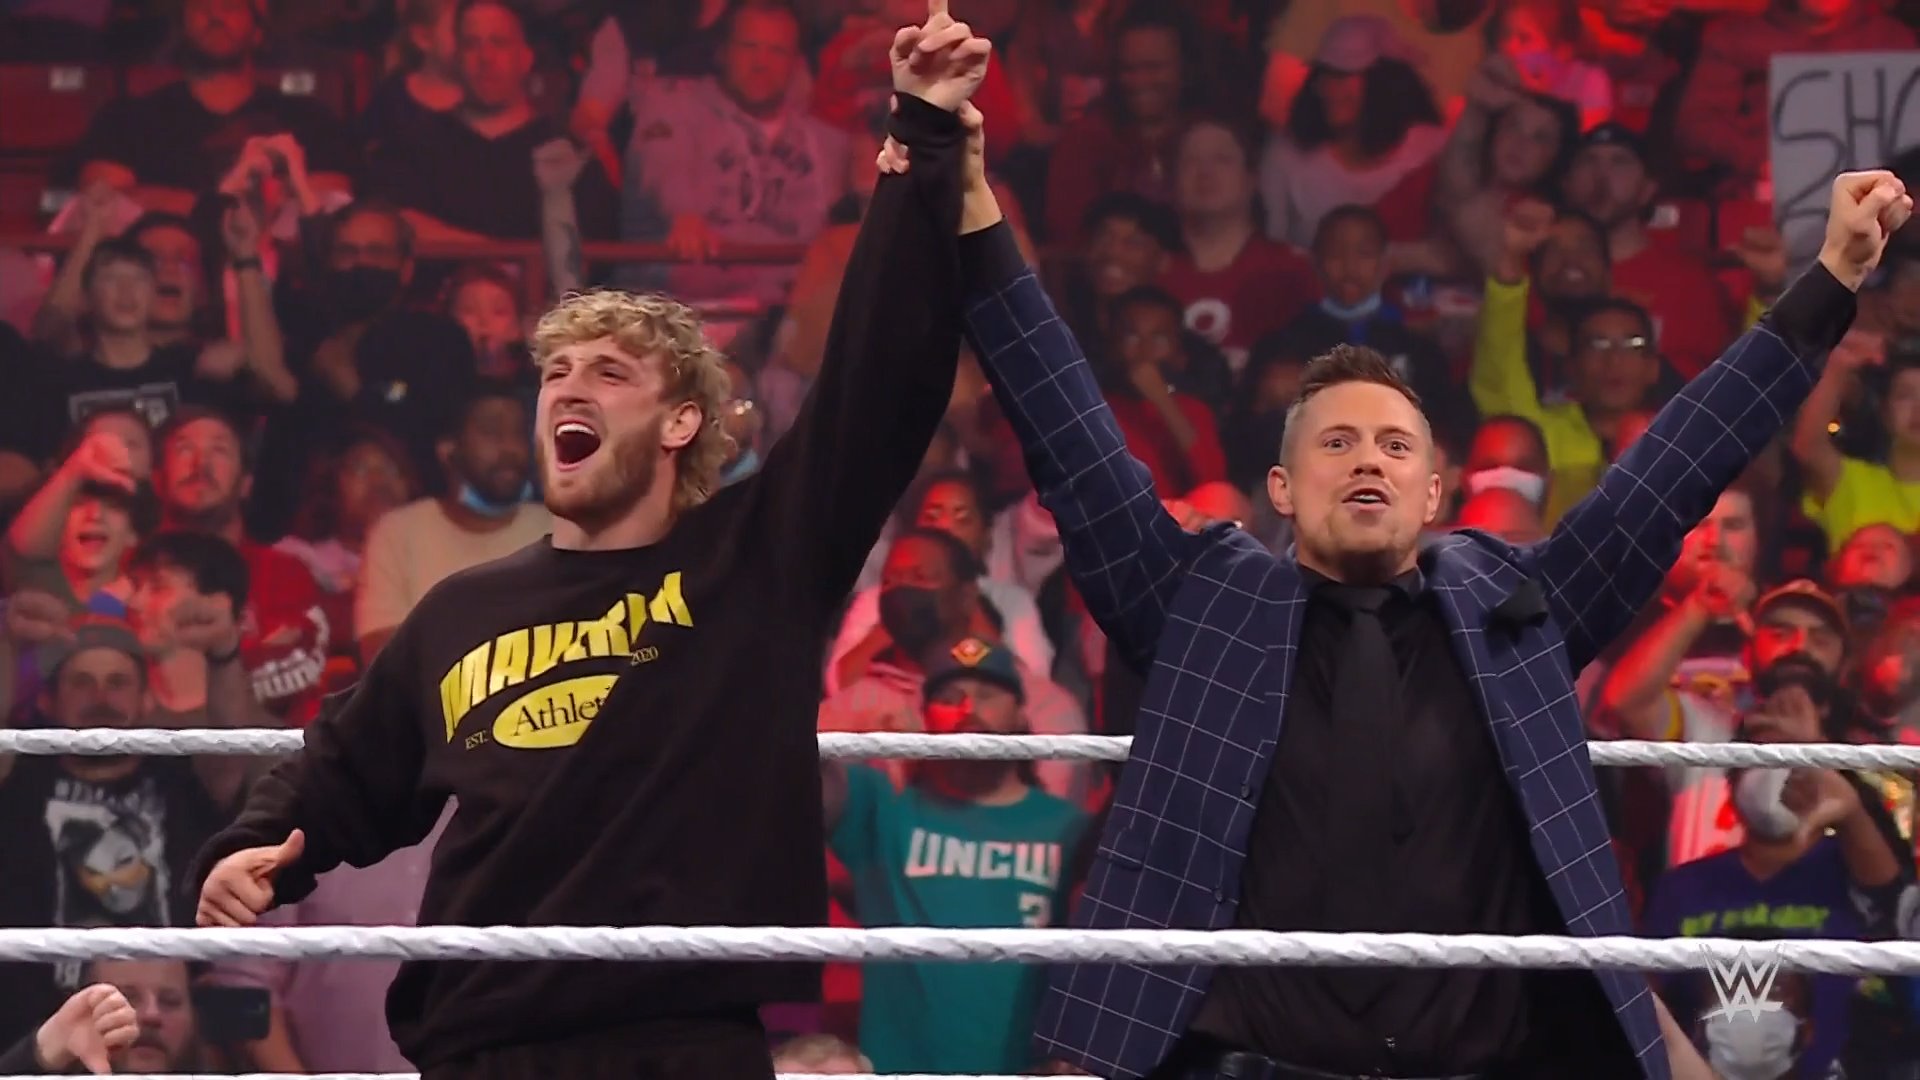 WWE fans go wild for Logan Paul after his in ring